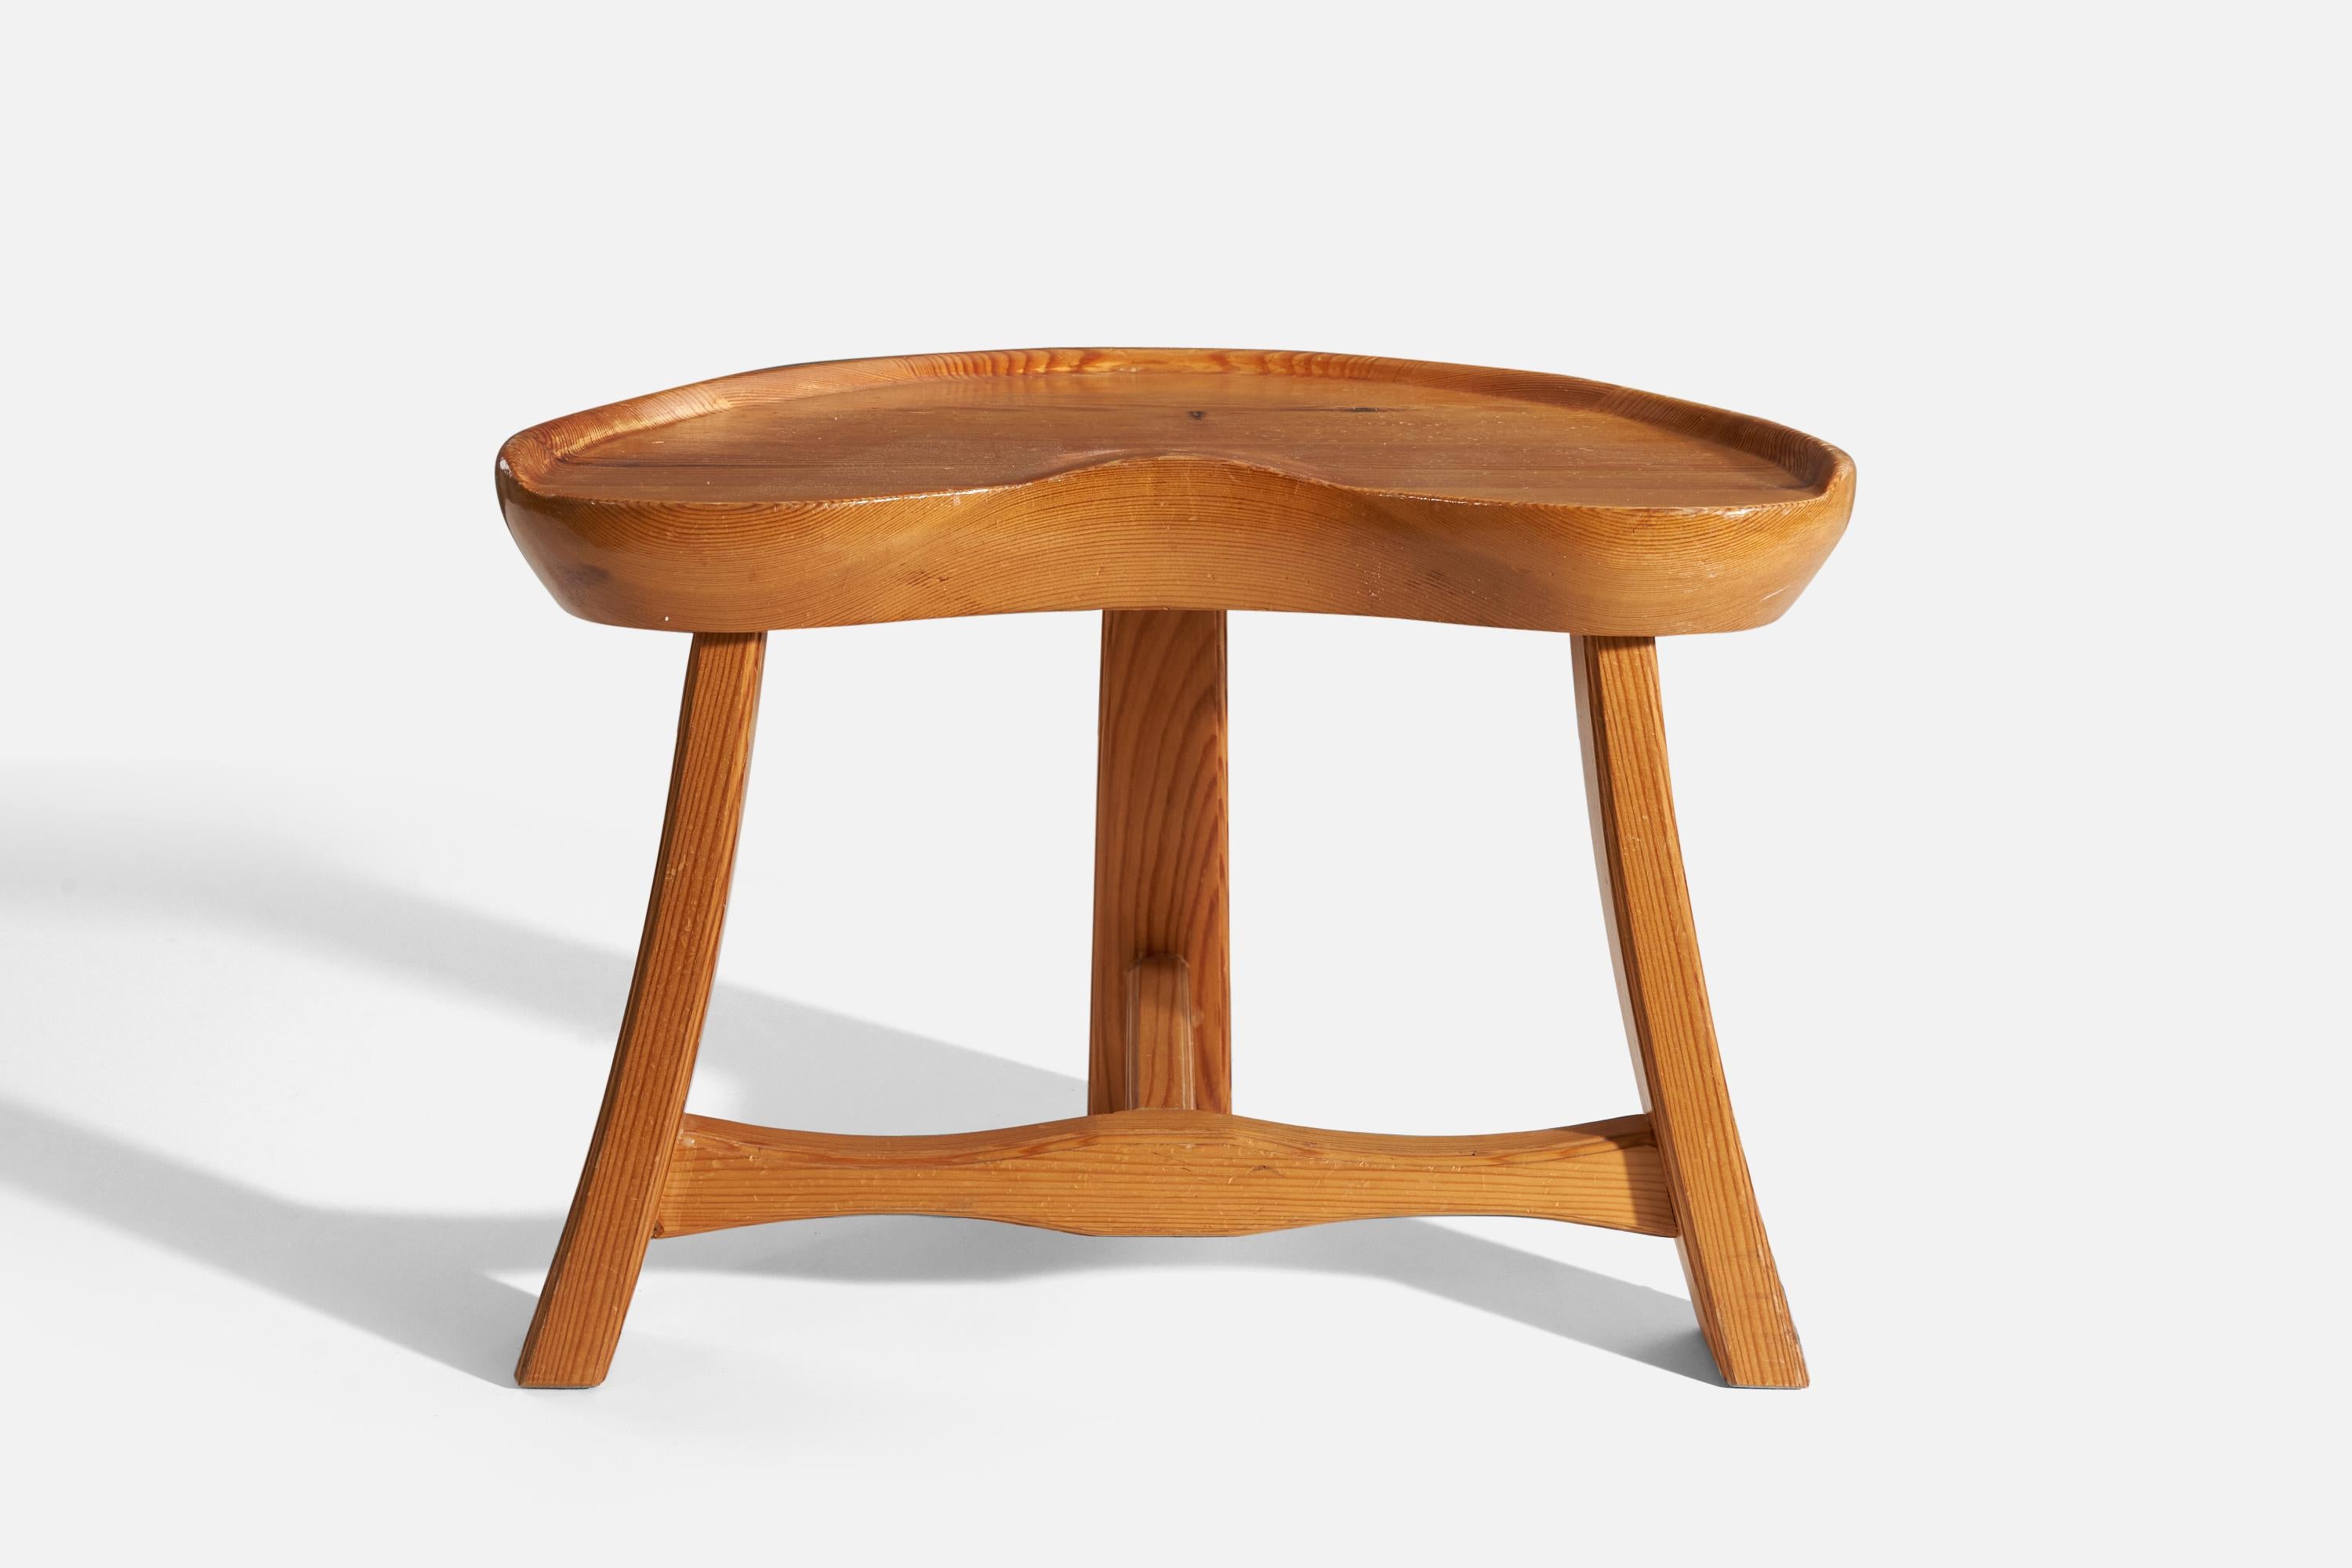 A solid pine stool, produced by a Swedish designer, Sweden, 1970s.